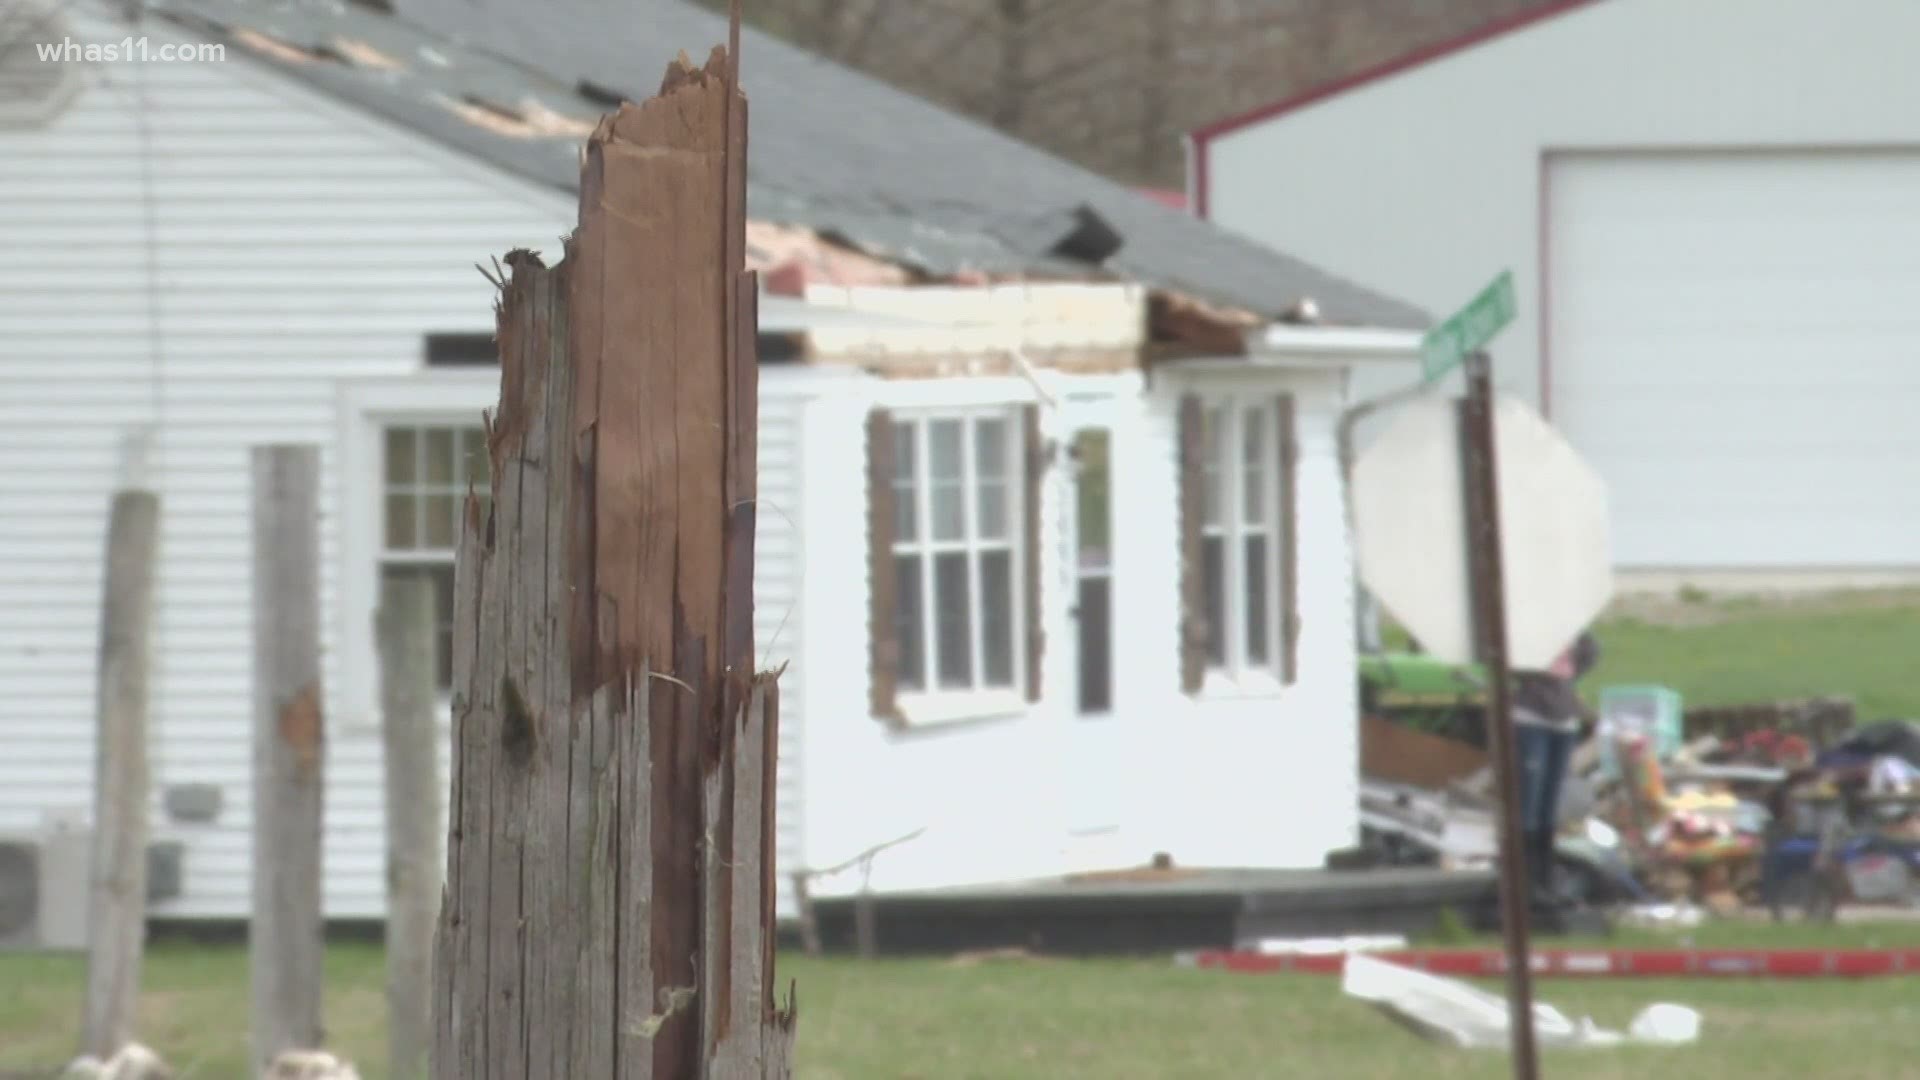 EF-1 tornado, EF-0 touched down in LaRue Co, Grayson Co. NWS says ...